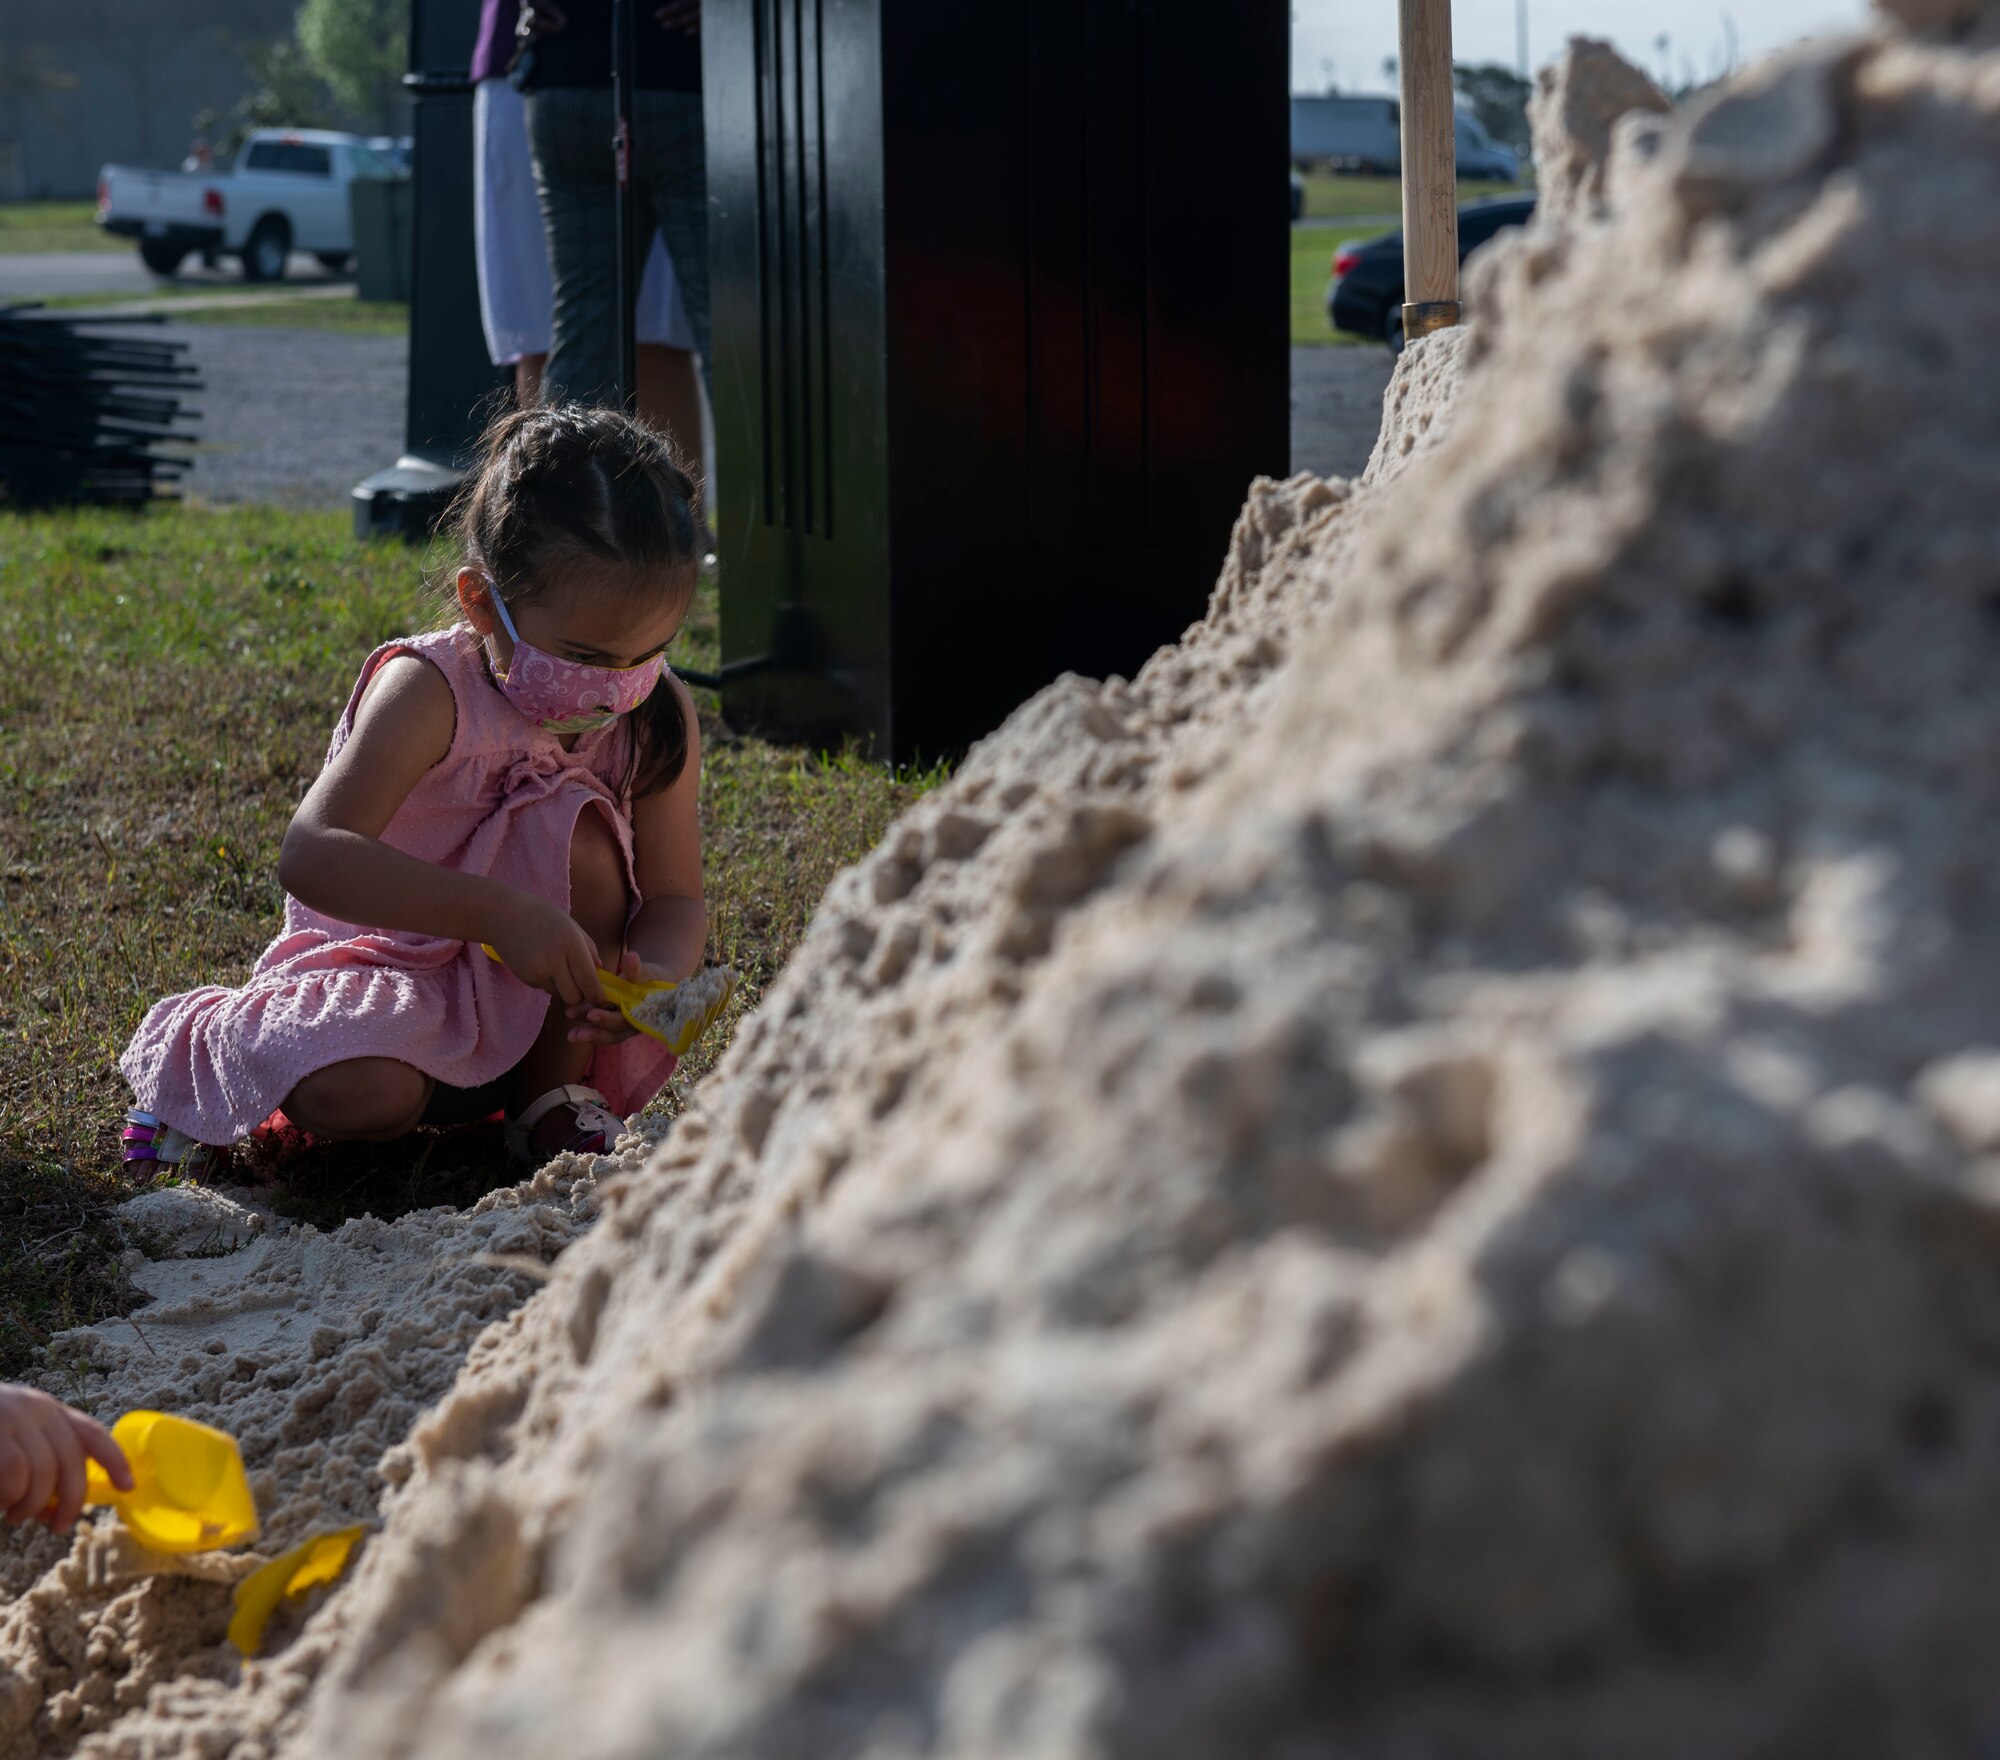 A child digs in the sand